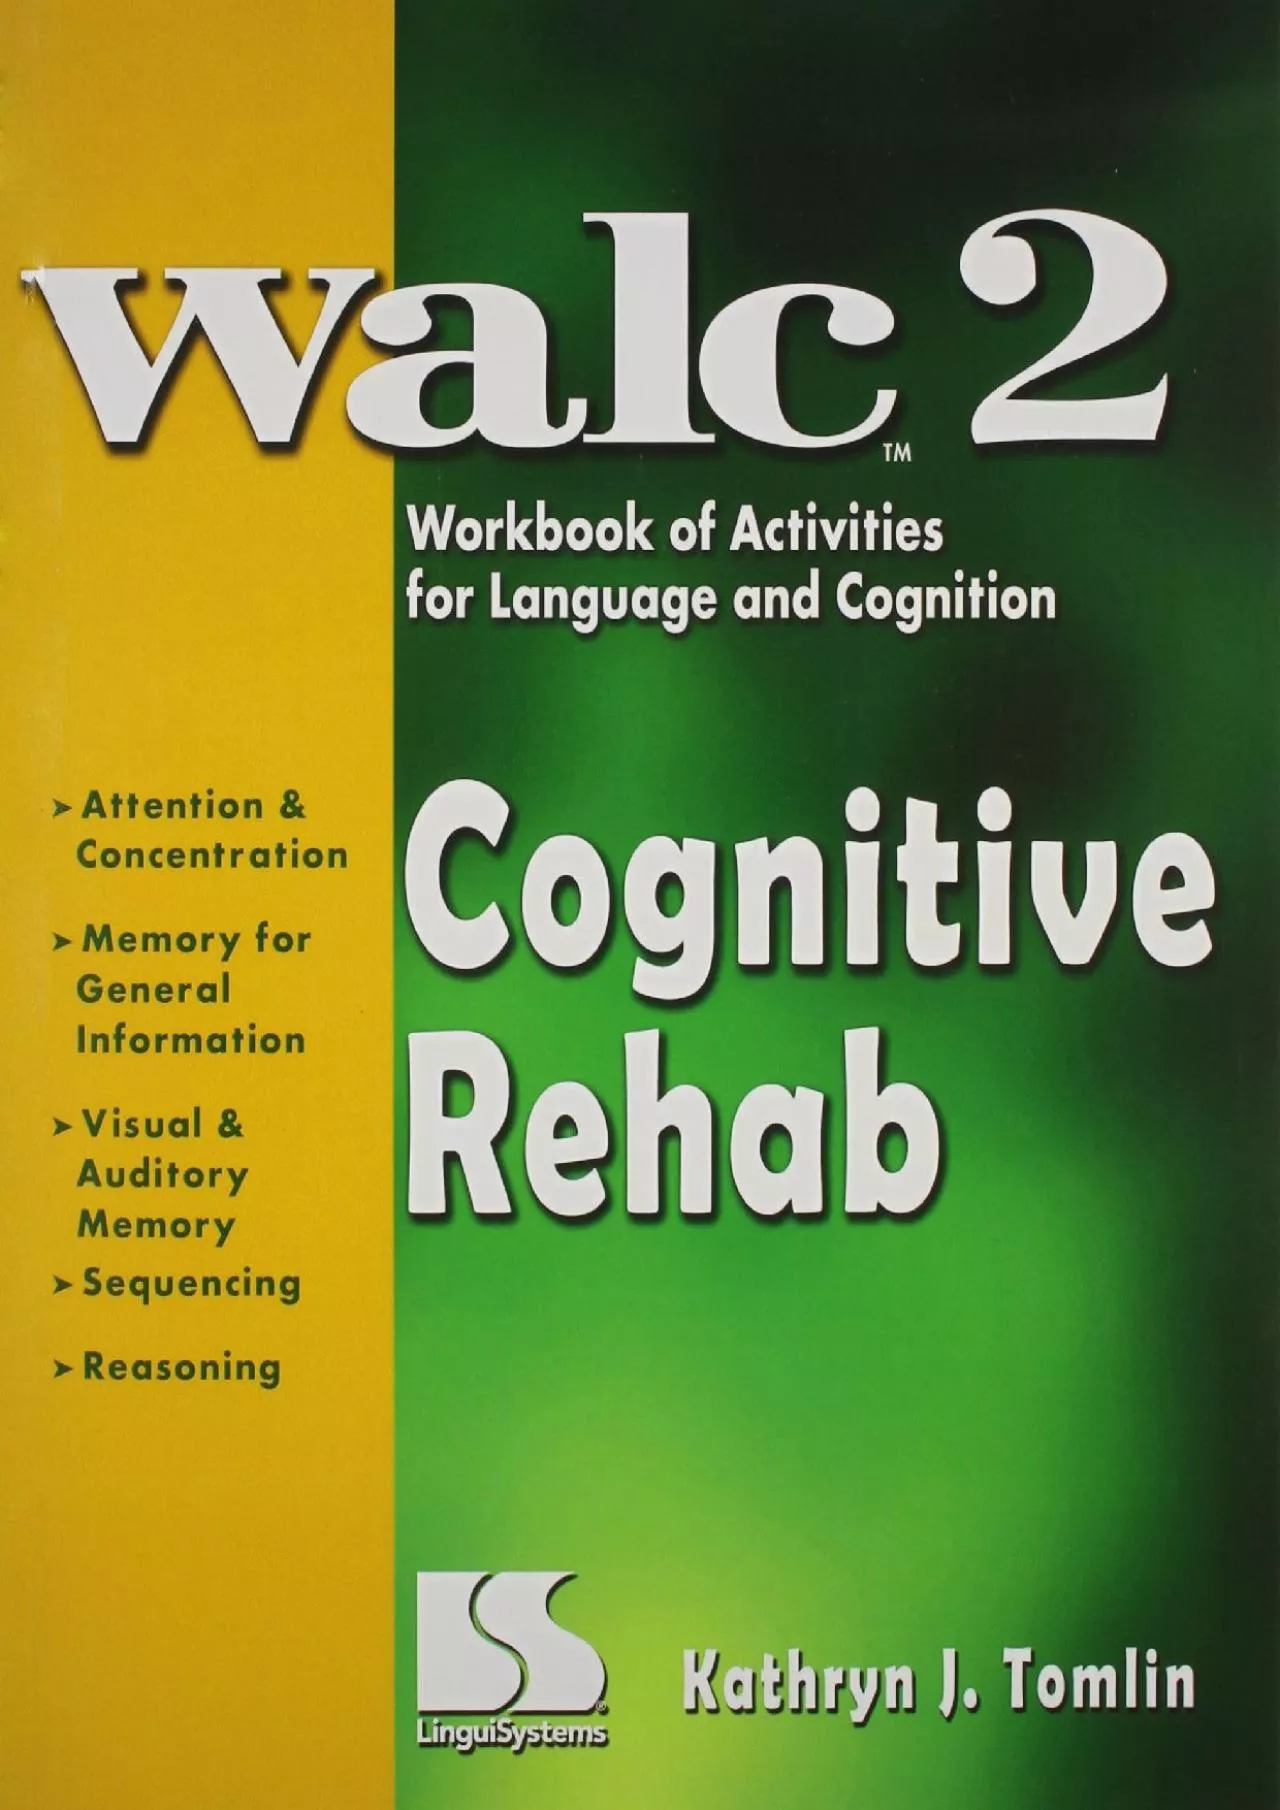 (READ)-Cognitive Rehab: WALC 2 Workbook of Activities for Language and Cognition